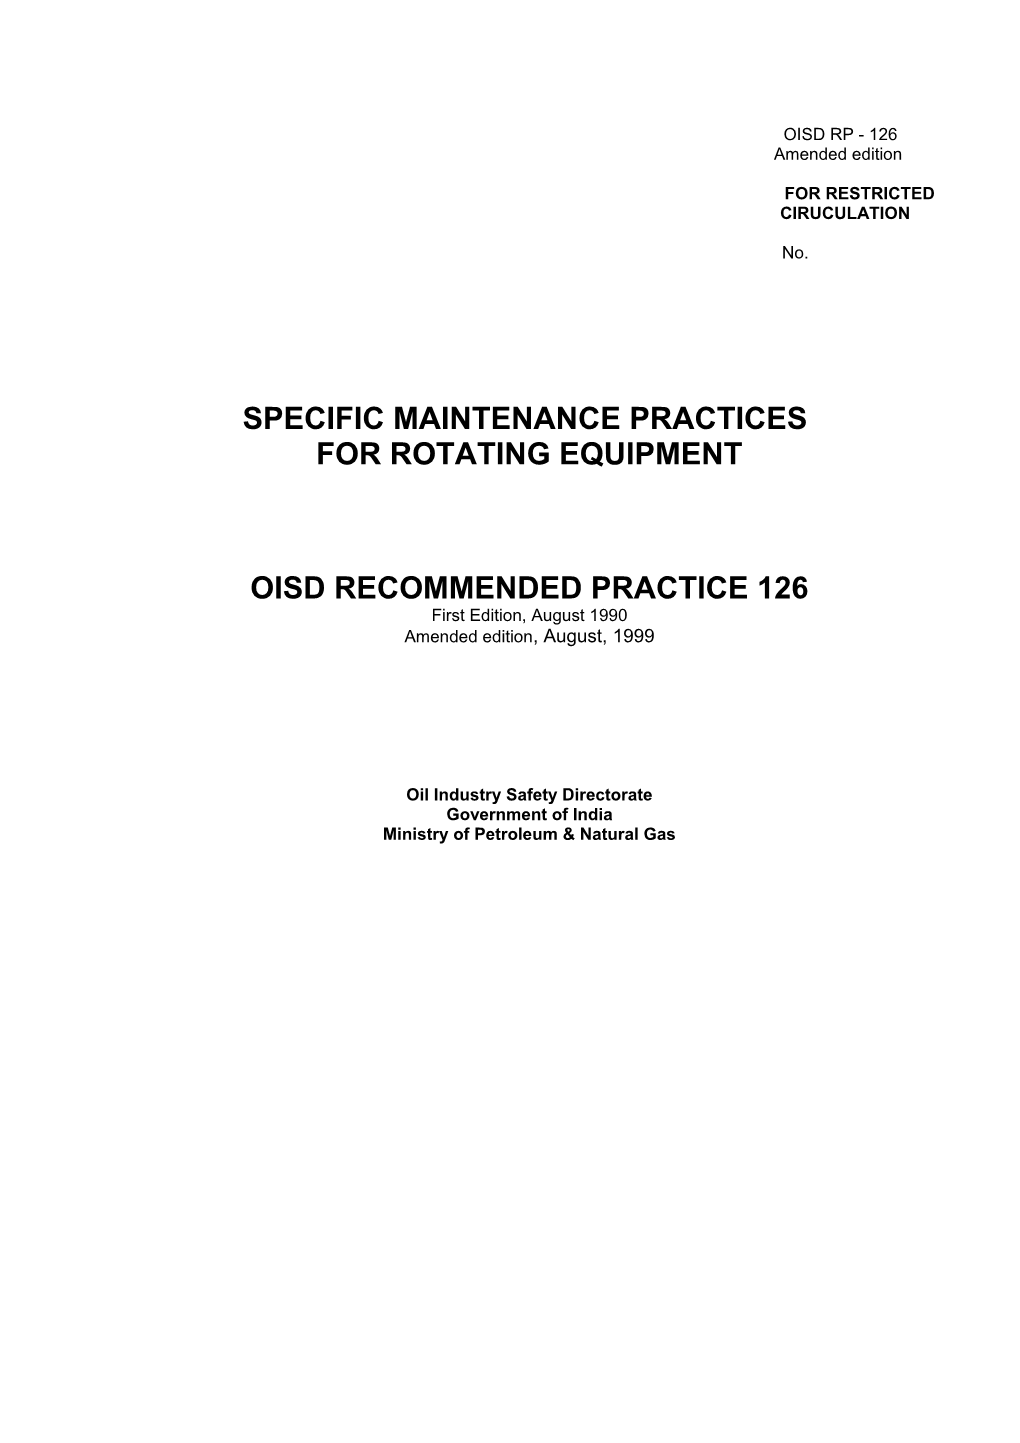 Specific Maintenance Practices for Rotating Equipment